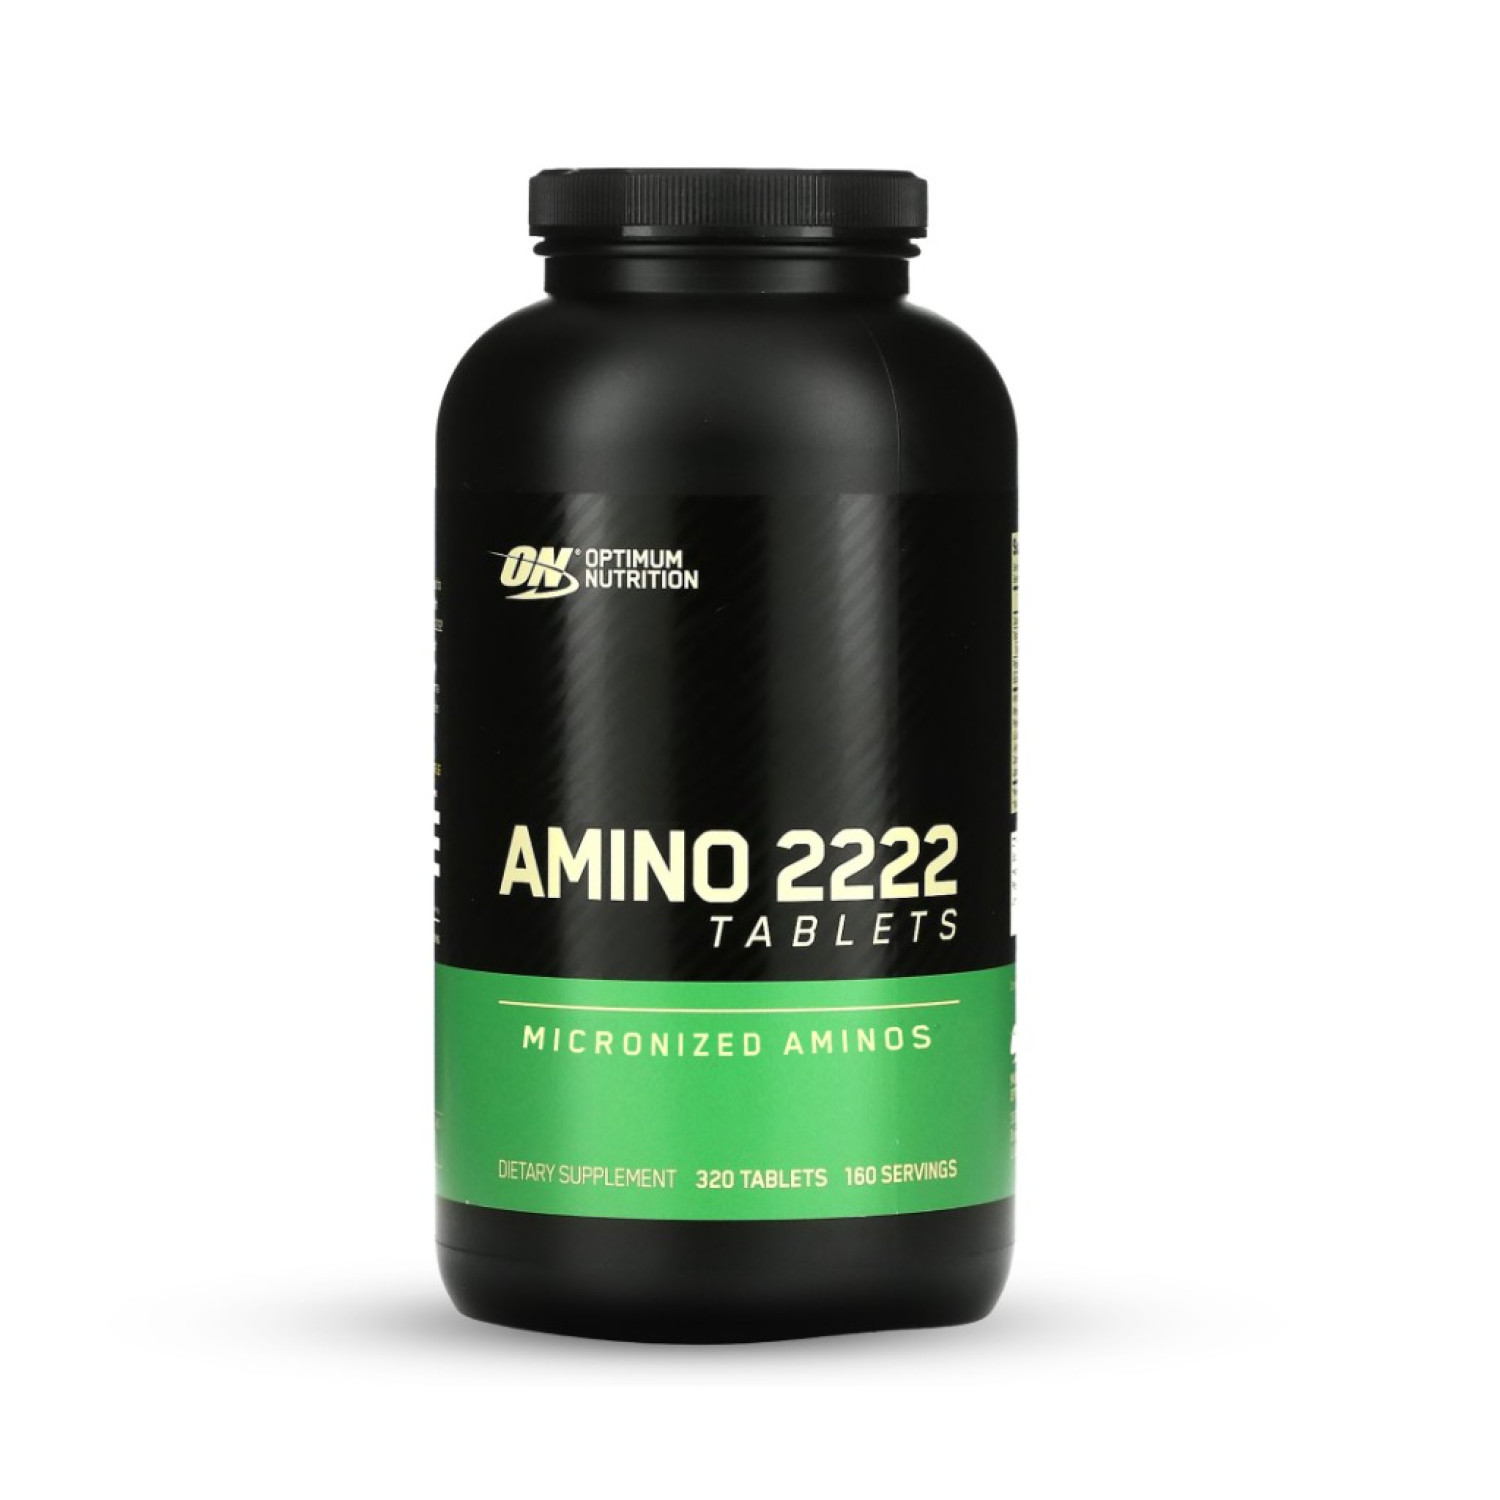 on-amino-2222-tablet-320-tablets-exp-date-10-24-653764992b896.jpeg